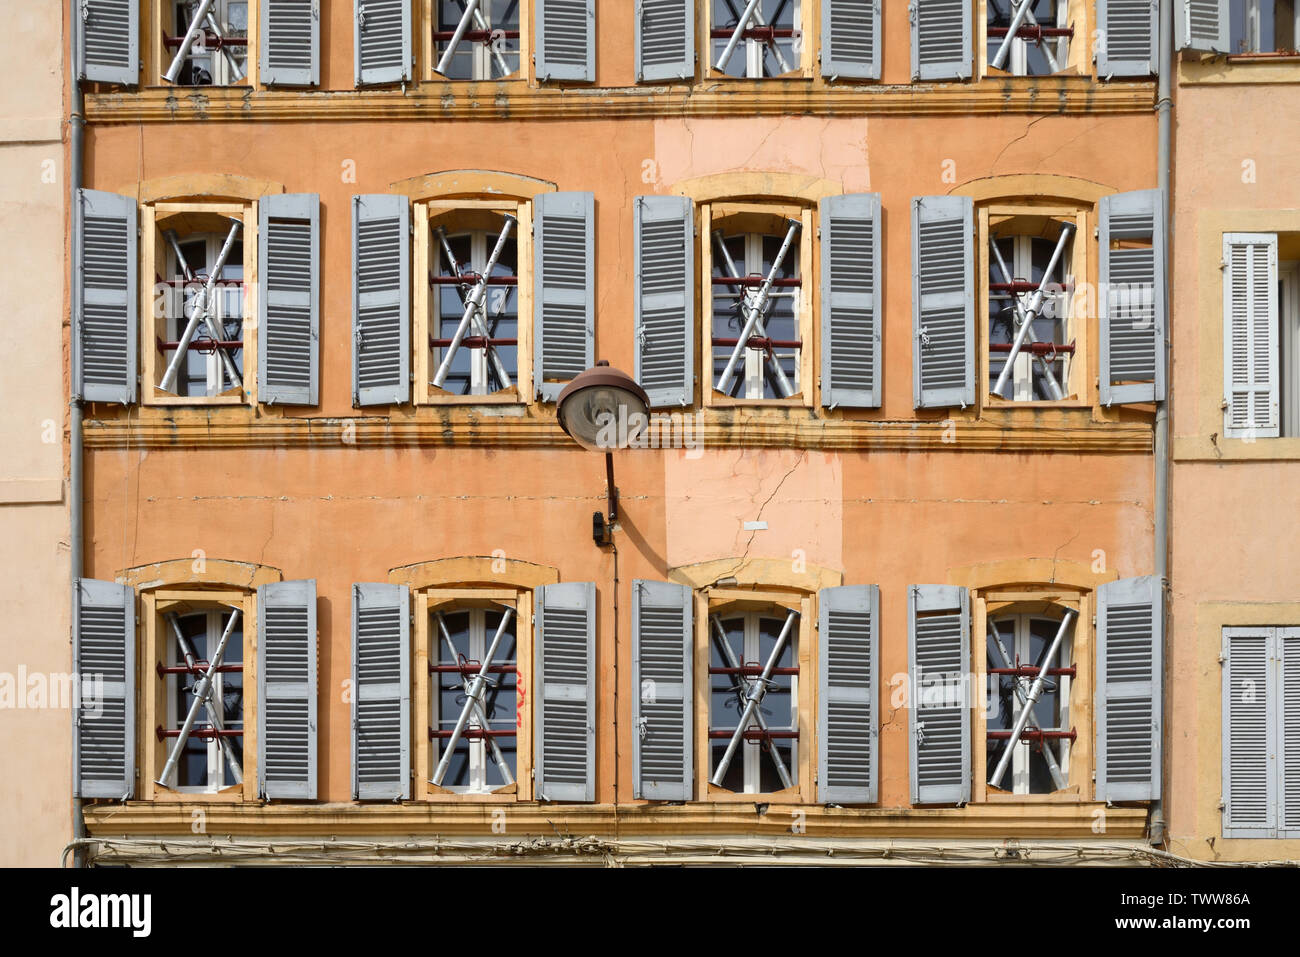 Dangerous Building, Closed on orders of the Municipality, With Windows Reinforced with Scaffolding & Cross Bracing in the Old Town Aix-en-Provence Stock Photo